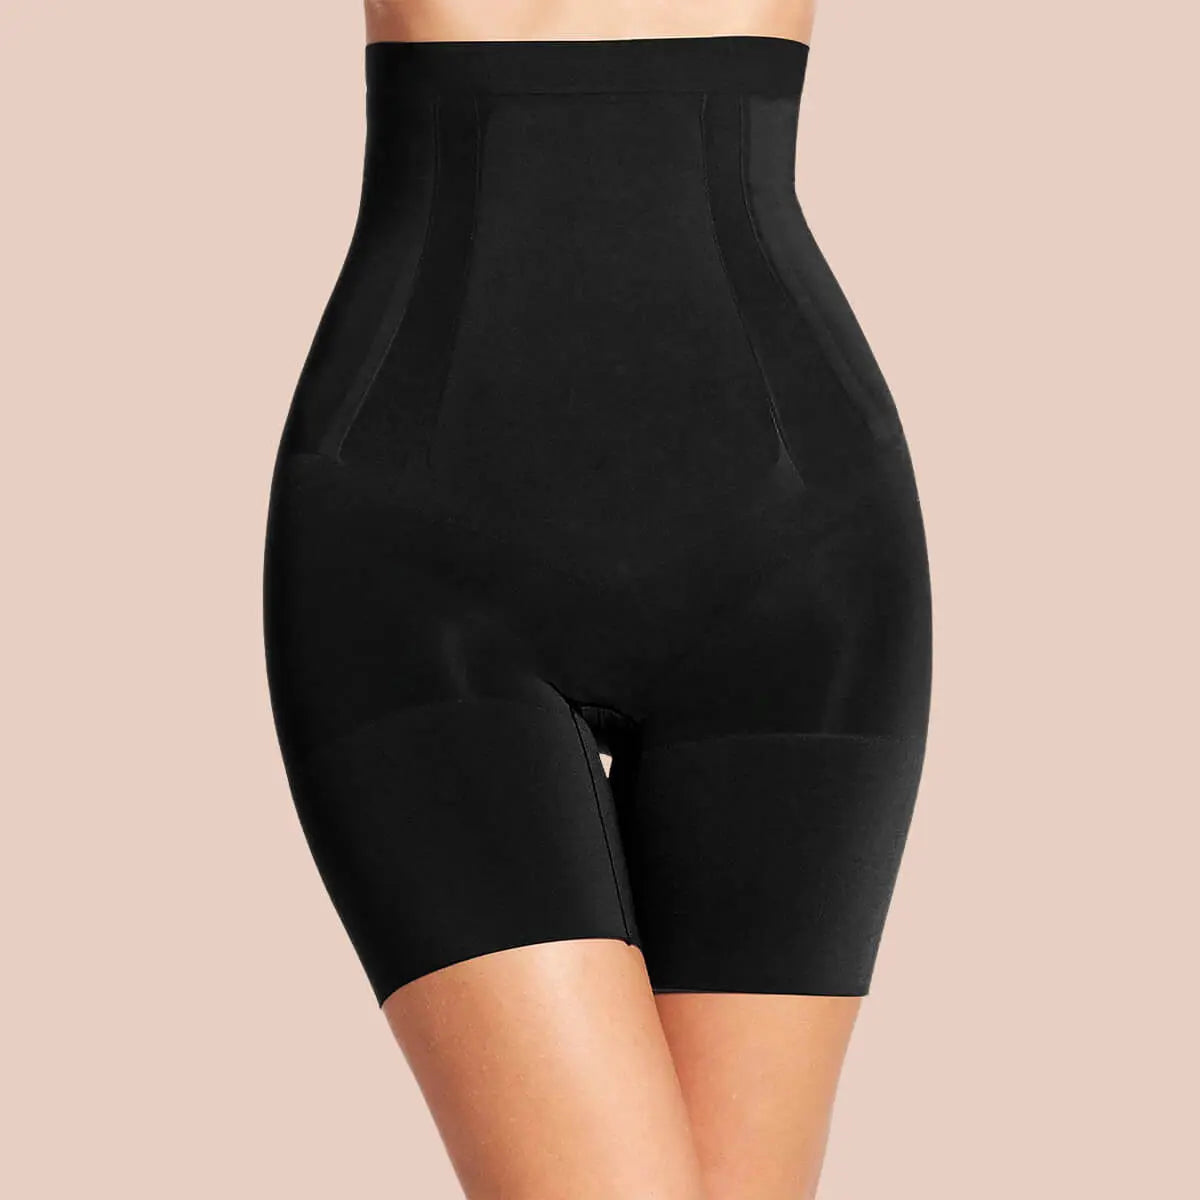  TEMKIN Tummy Control Knickers Shapewear for Women Butt Lifter  Panties Body Shaper Hip Enhancer Shorts High Waisted Body Tummy Control  Boyshort Underwear (Color : Black, Size : 4X-Large) : Clothing, Shoes